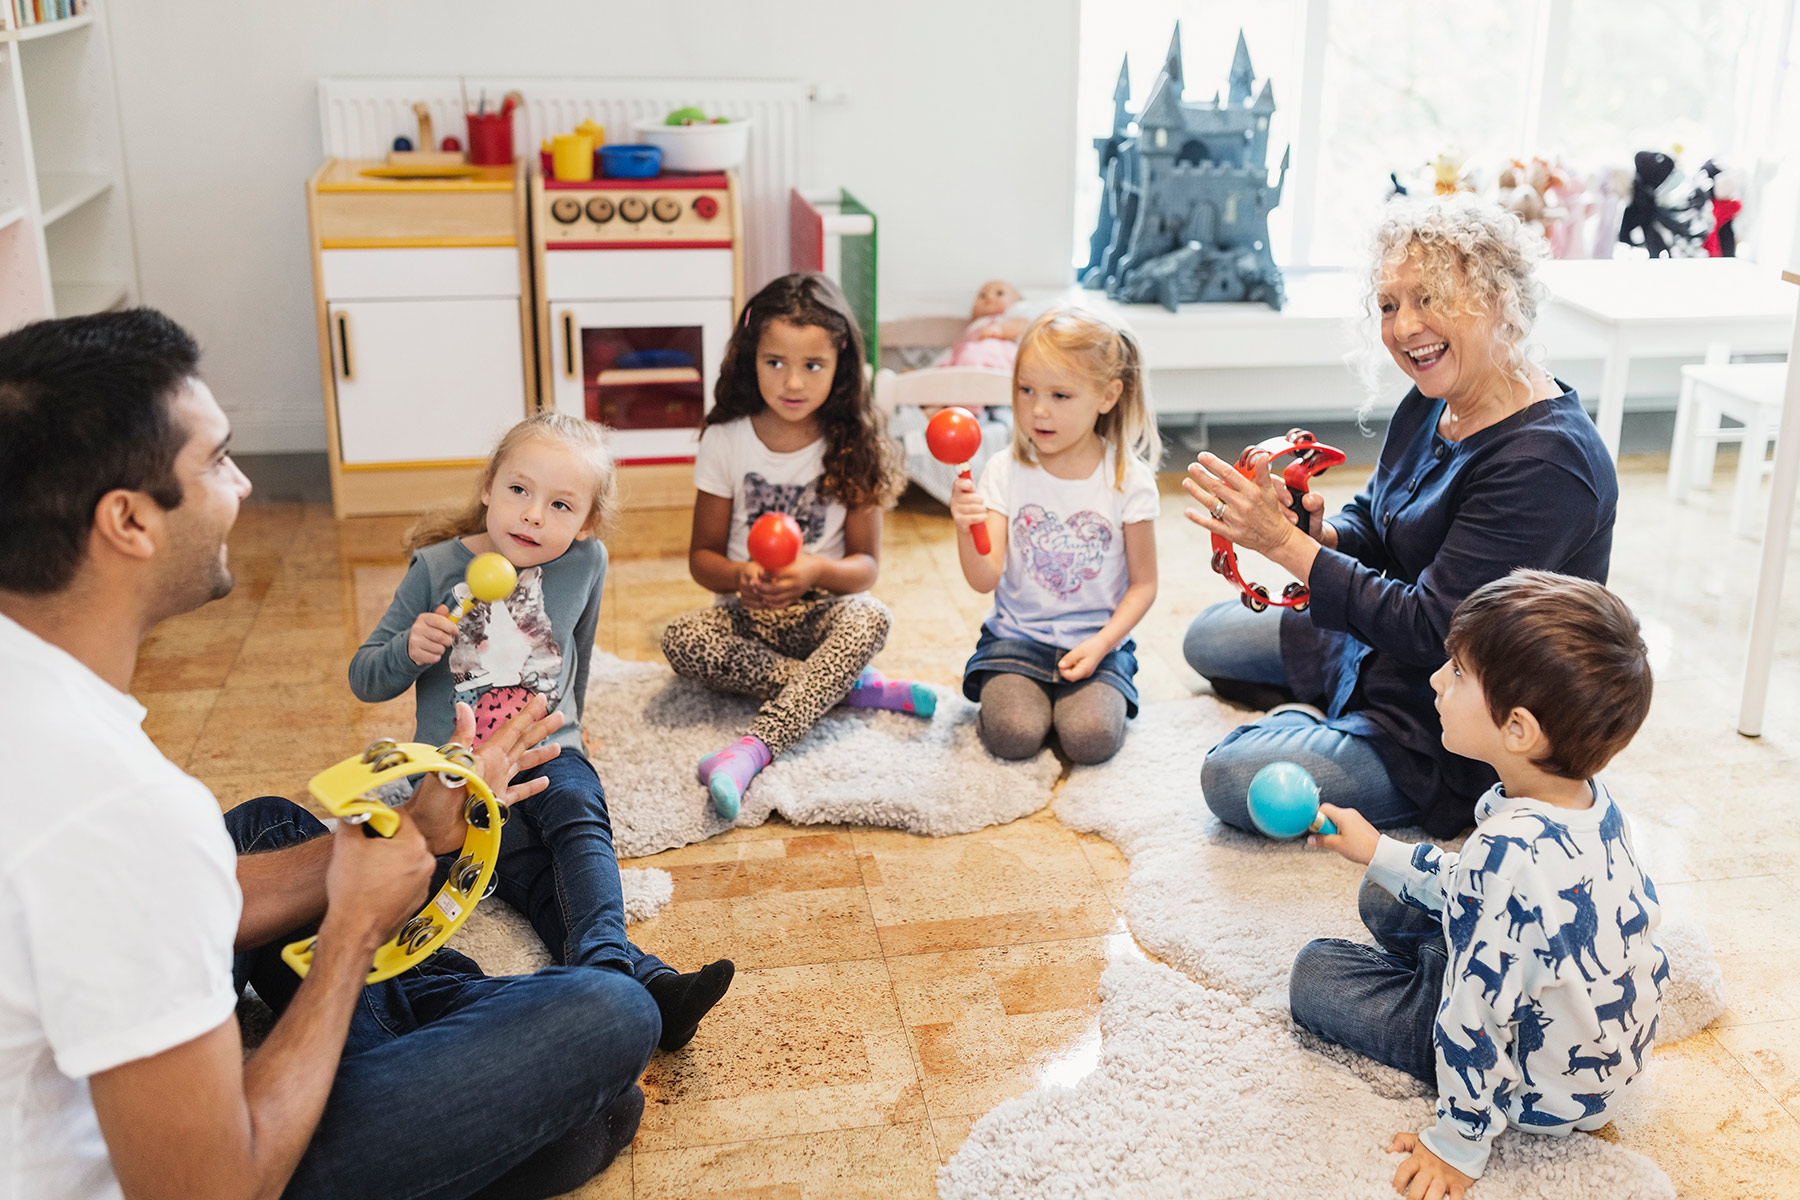 Children playing musical instruments with two teachers in a preschool